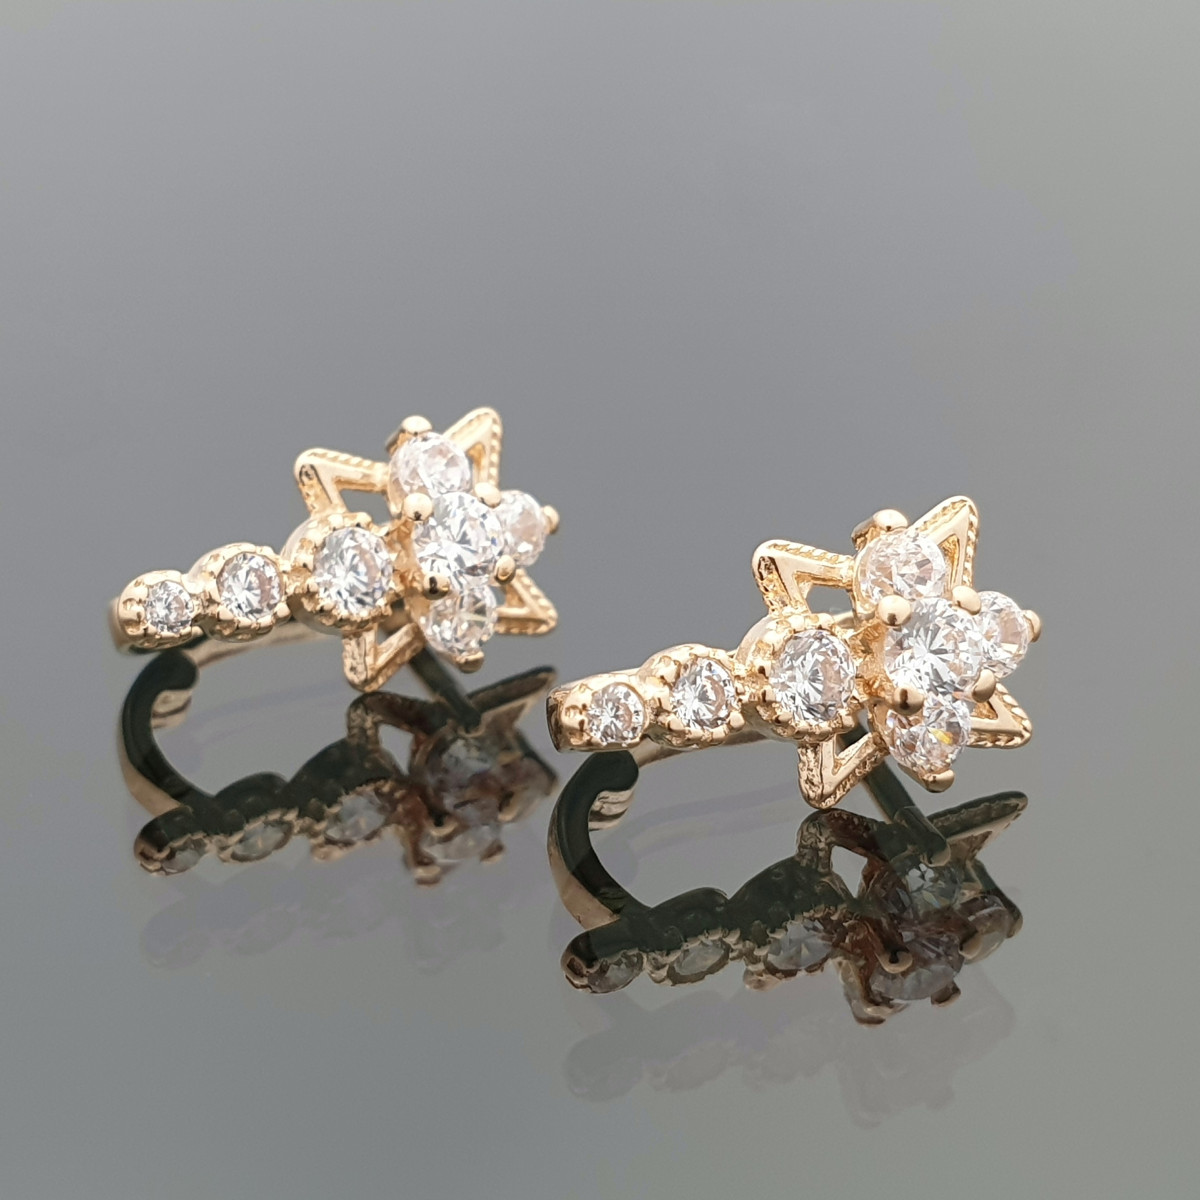  Gold earrings with eyelets (1112)